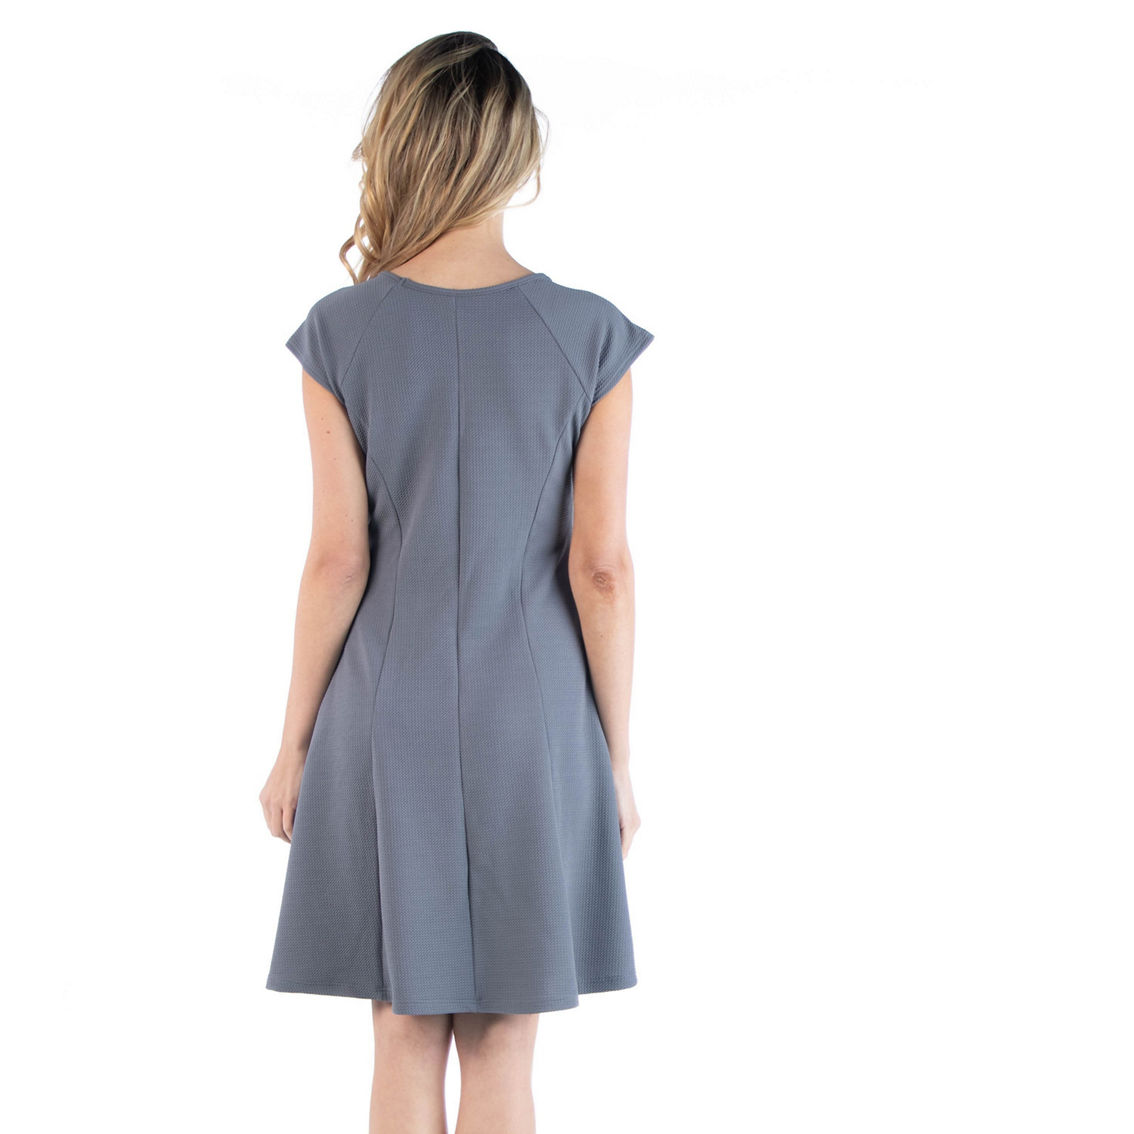 24seven Comfort Apparel Scoop Neck A Line Dress with Keyhole Detail - Image 3 of 4